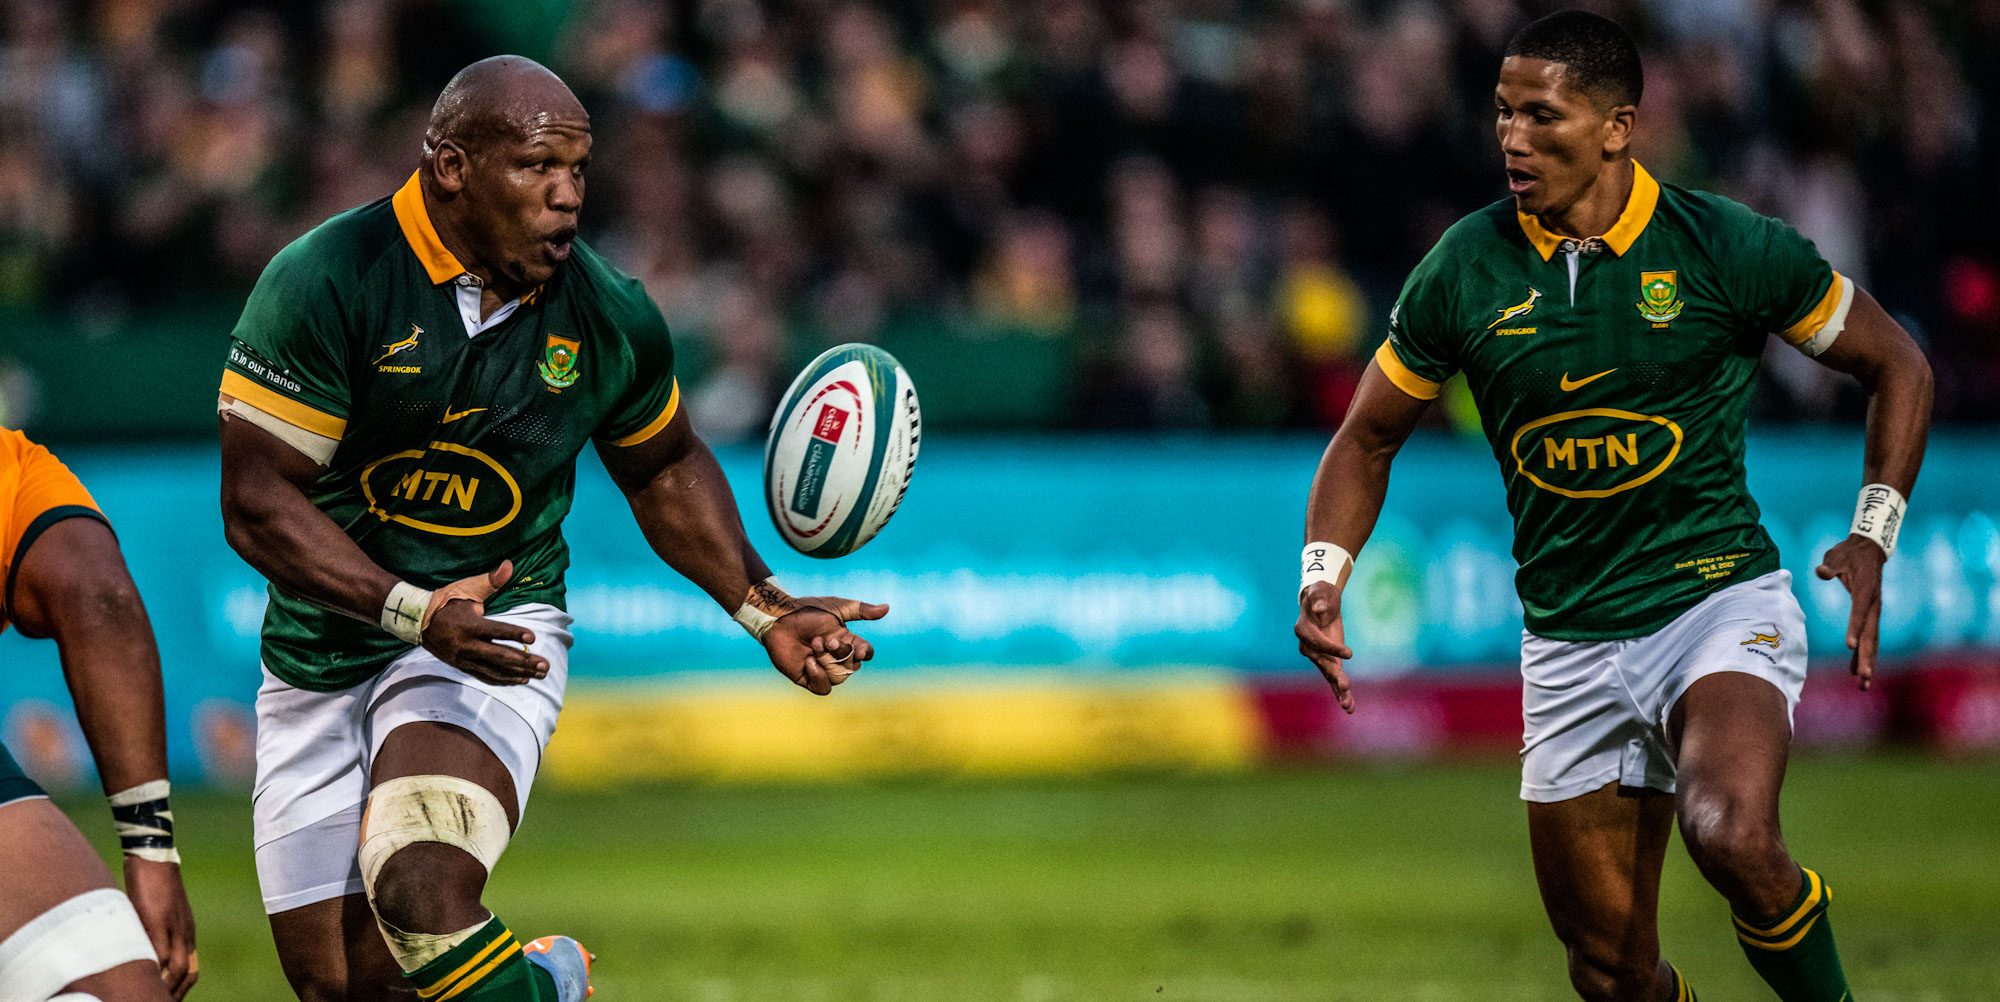 Bongi Mbnambi in action against Australia earlier this year.